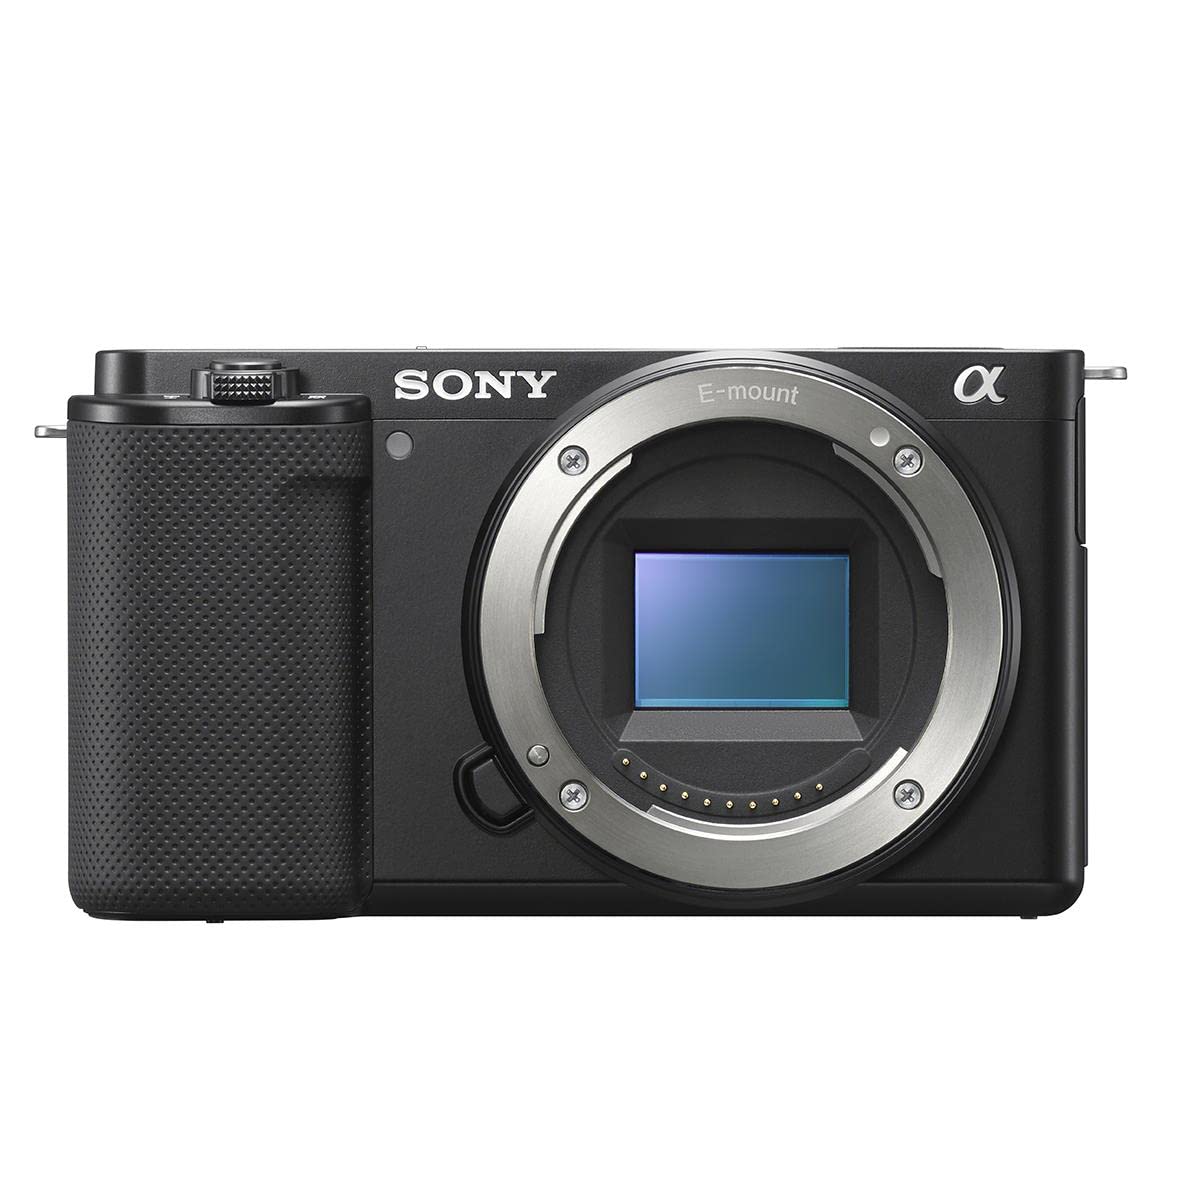 Sony ZV-E10 Mirrorless Camera, Black Bundle with Corel PC Photo & Video Editing Software Suite, 32GB SD Card, Shoulder Bag